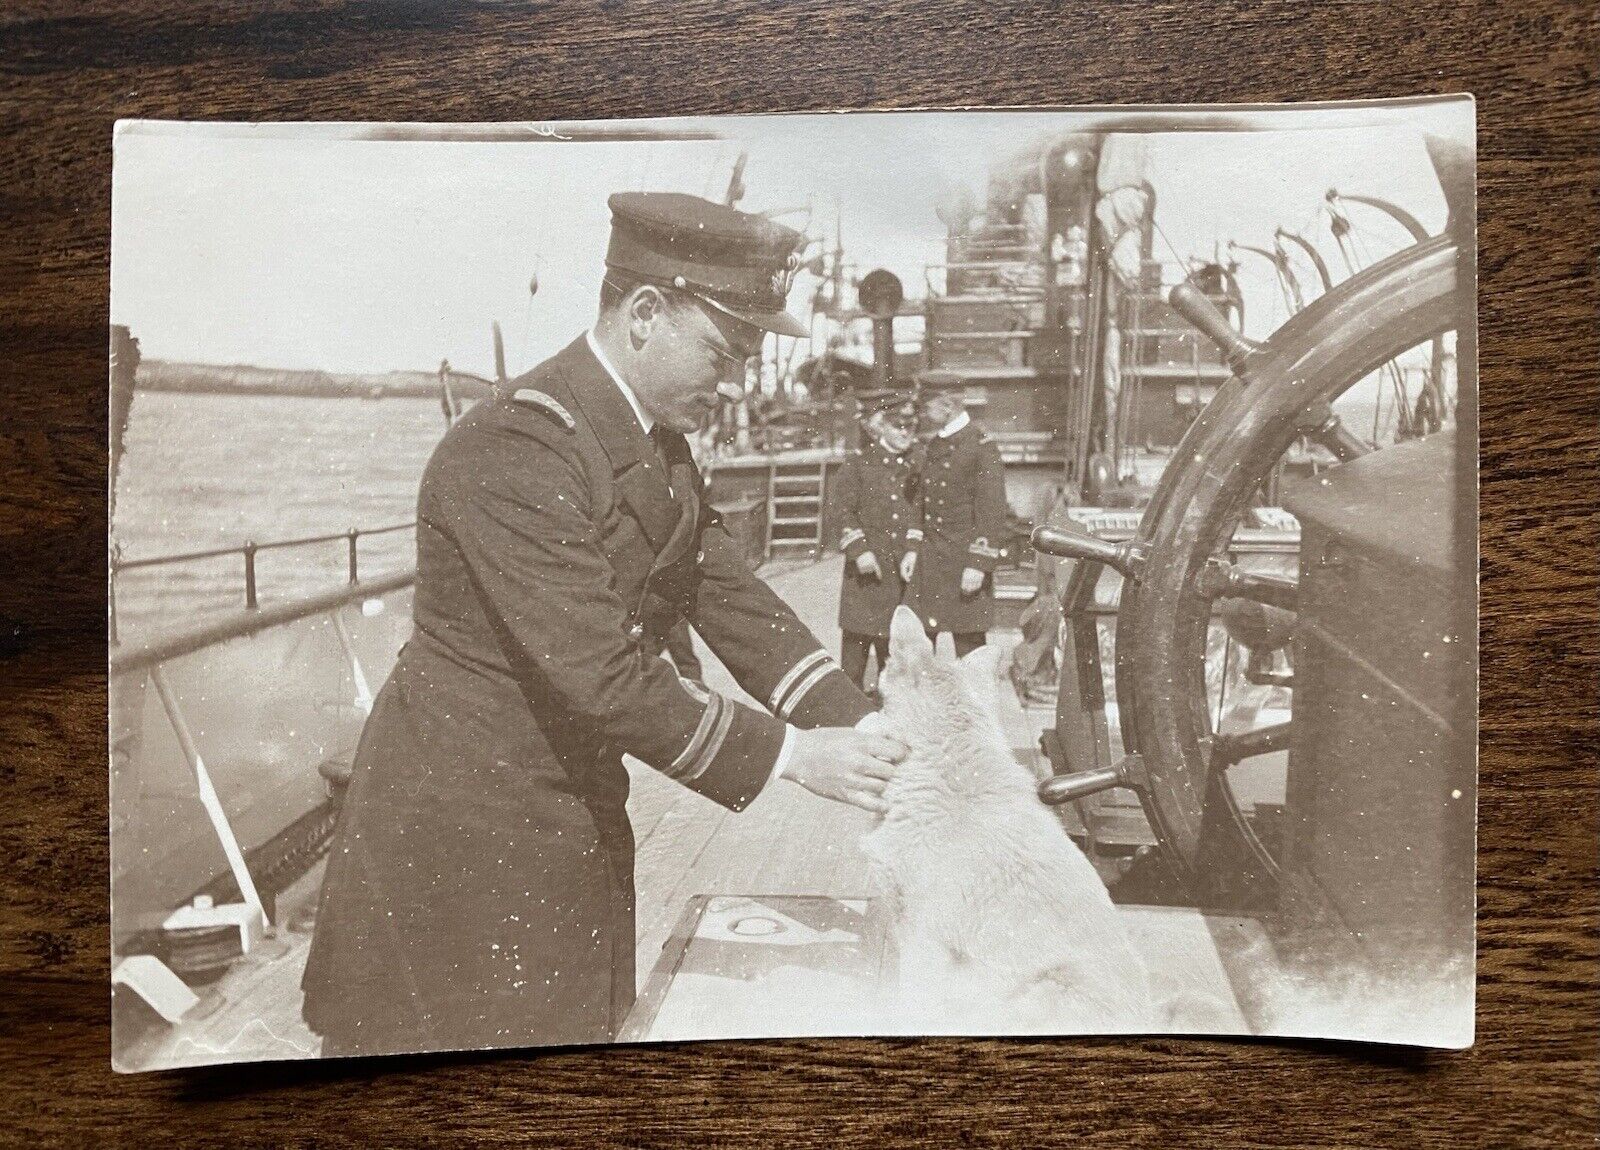 Sailors on a Boat Ship with a Dog Original Antique Vintage Photo